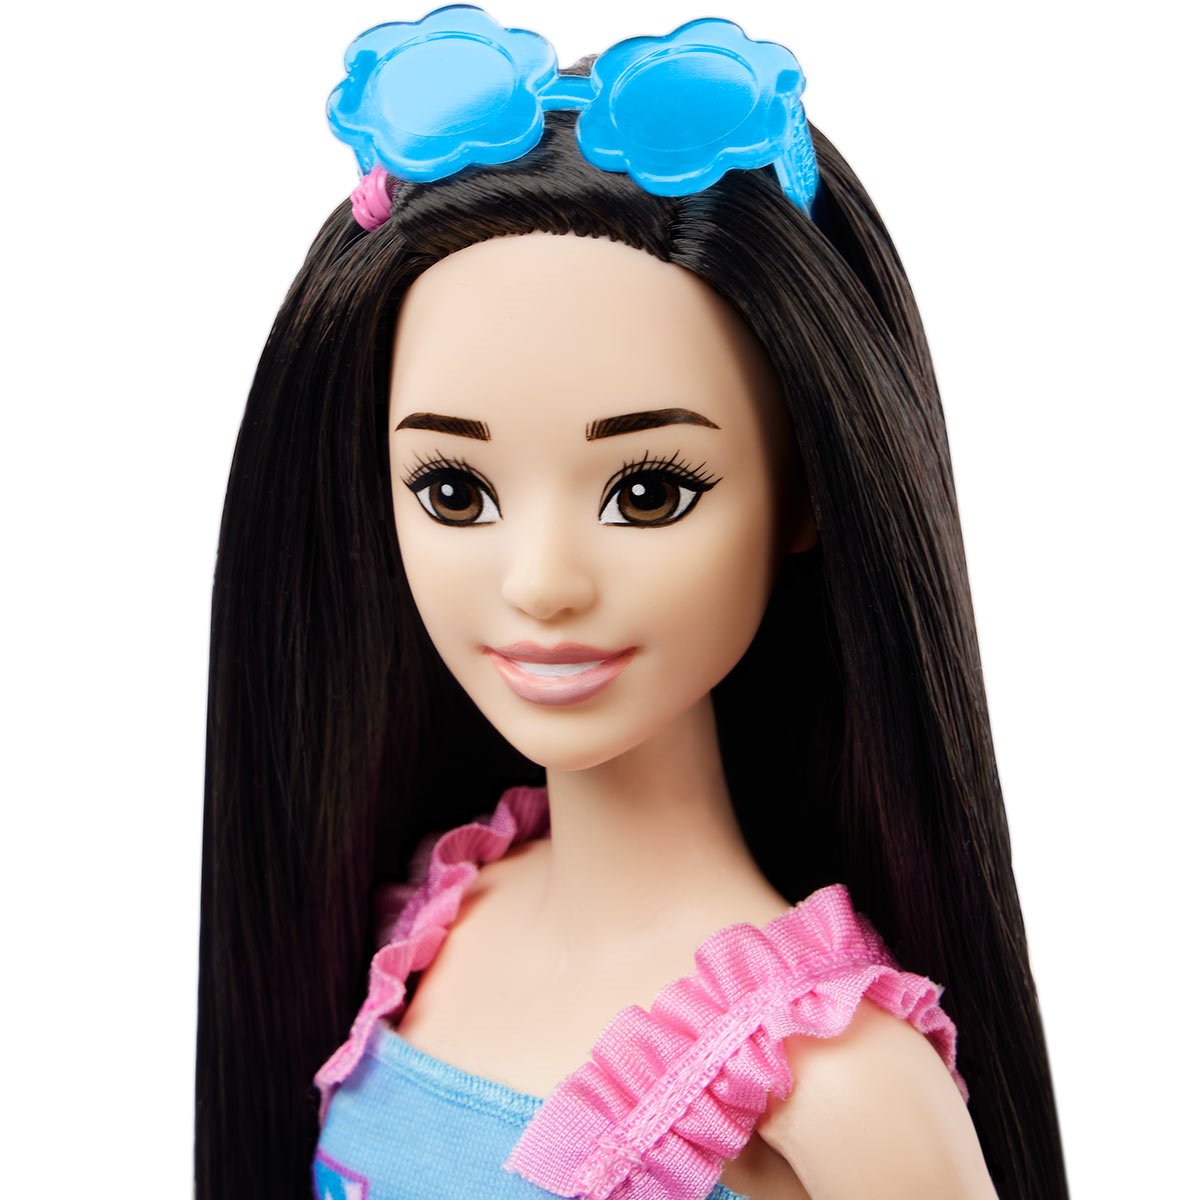 Barbie Fashionistas Doll 185 Black Updo Hair OffShoulder Bleached  Denim Dress Orange Bandana White Boots Toy for Kids Ages 3 and Up   Amazonin Toys  Games